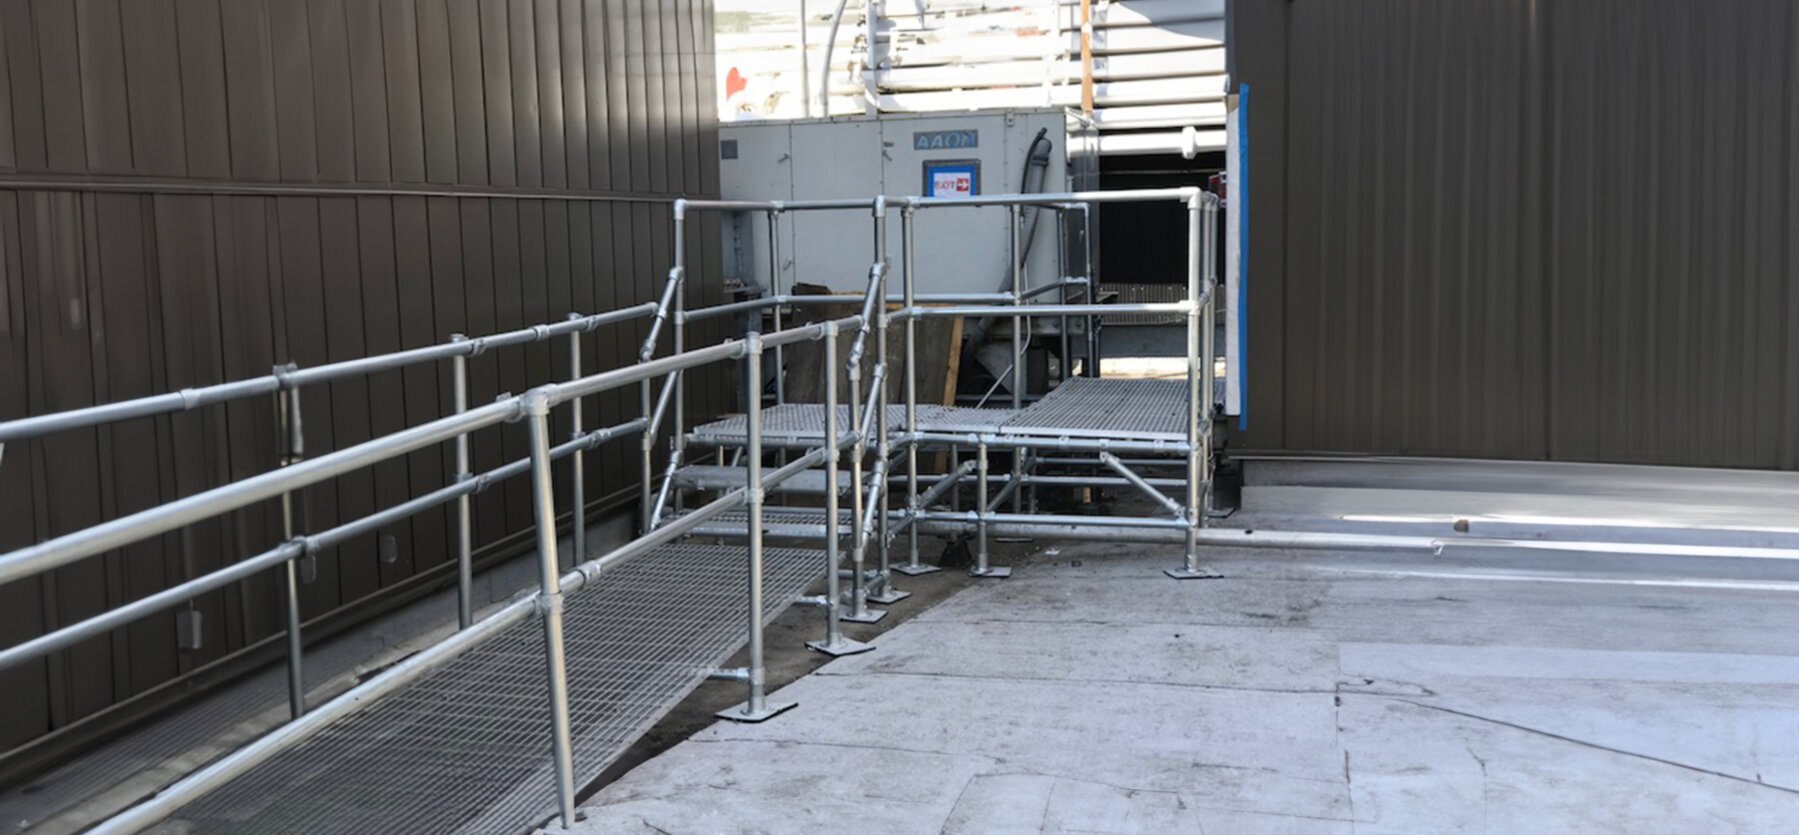 Rooftop HVAC Stairs and Work Platforms